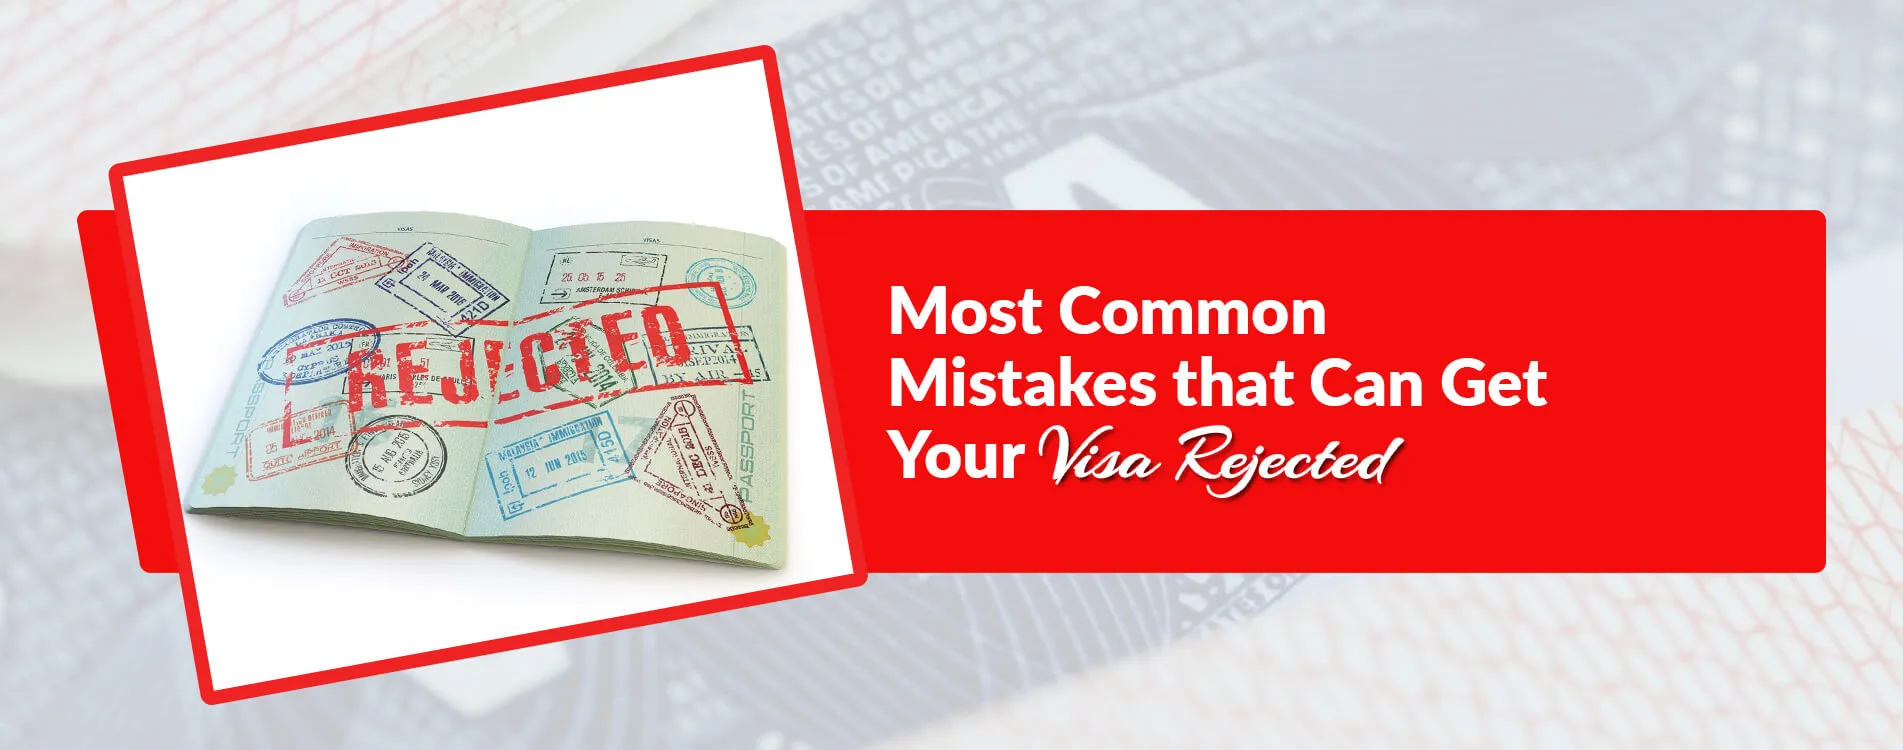 Most Common Mistakes that Can Get Your Visa Rejected